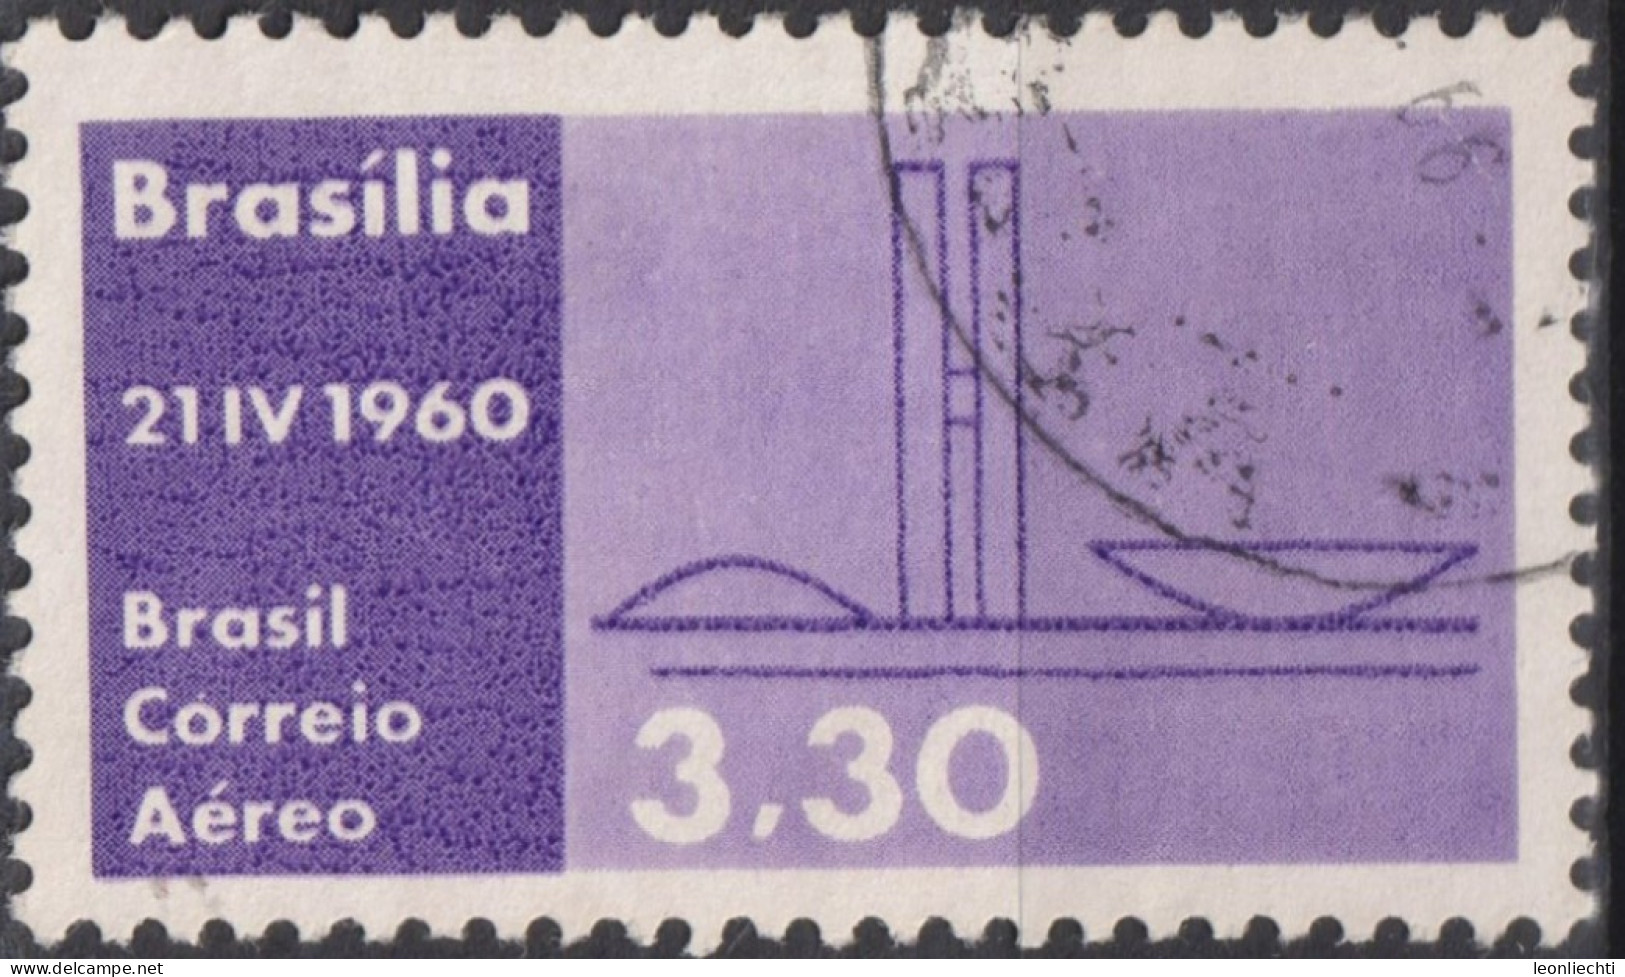 1960 Brasilien AEREO ° Mi:BR 979, Sn:BR C95, Yt:BR PA83, Parliament Buildings, Inauguration Of Brasilia As Capital - Used Stamps